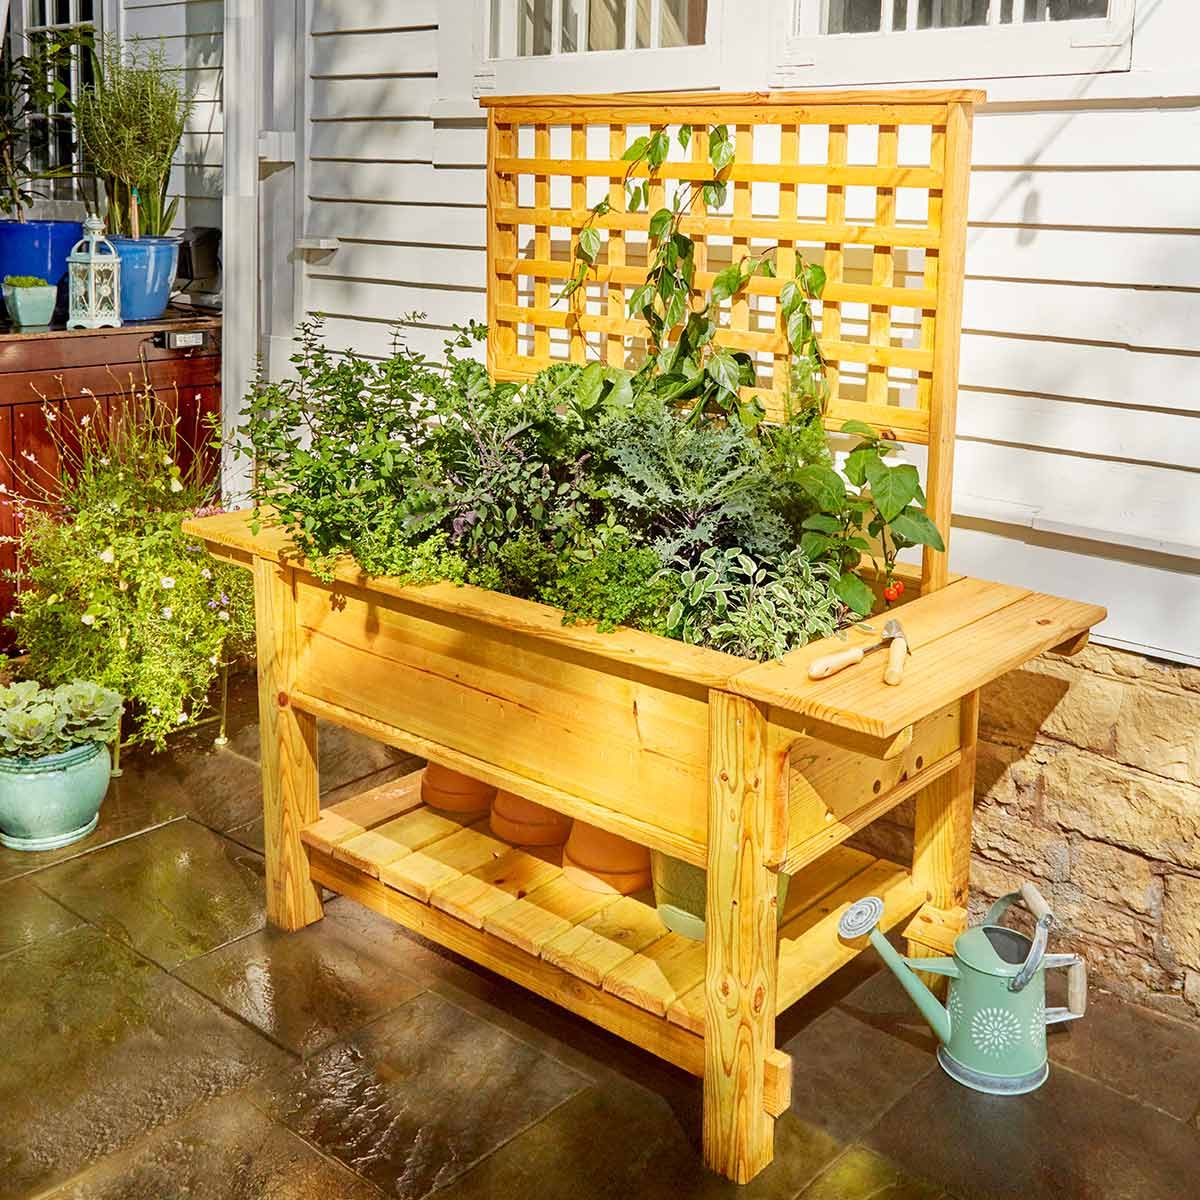 Woodworking projects for outside